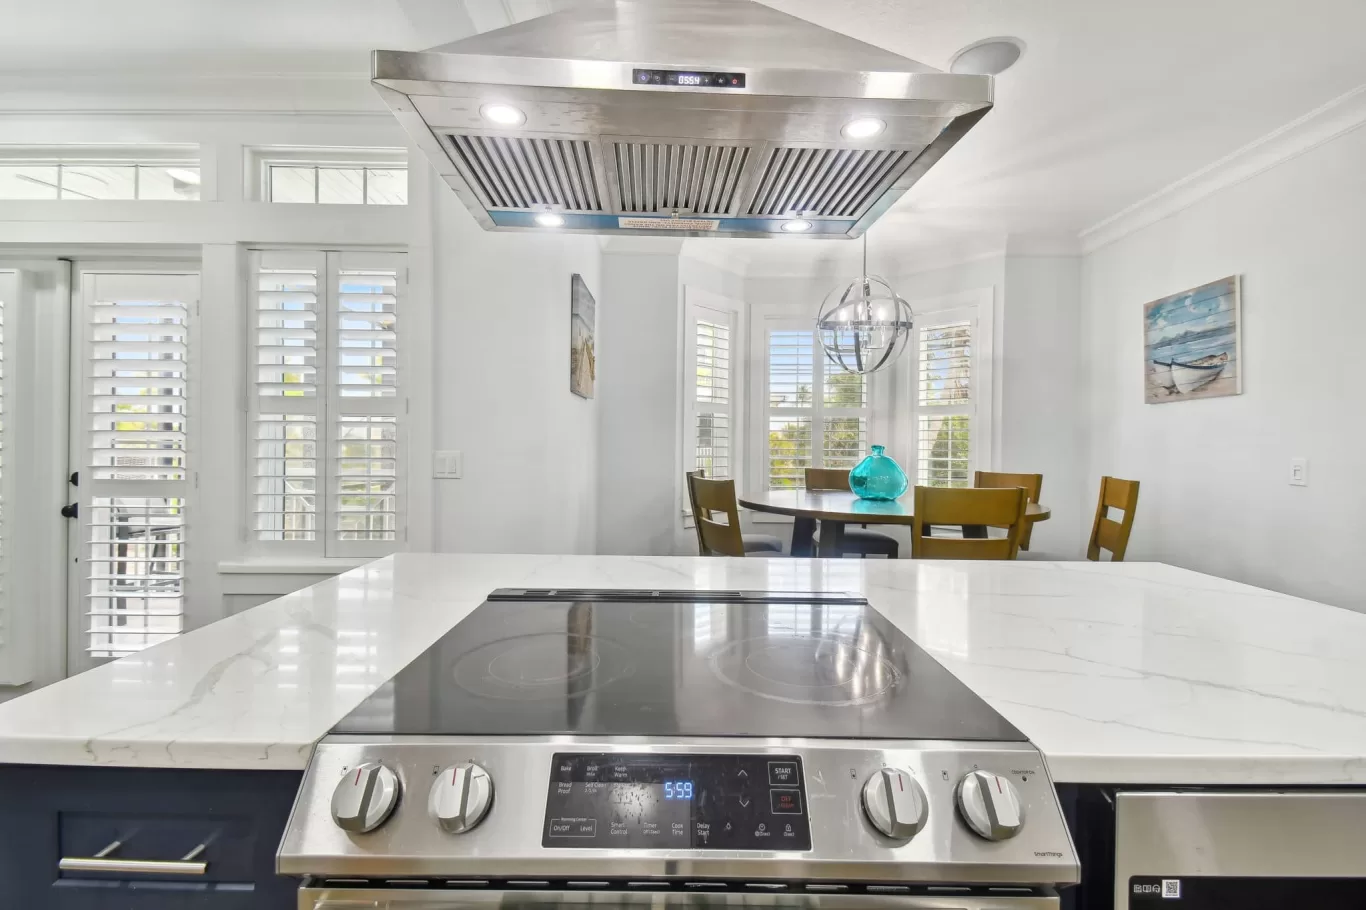 LouverWood shutters in a large, open kitchen